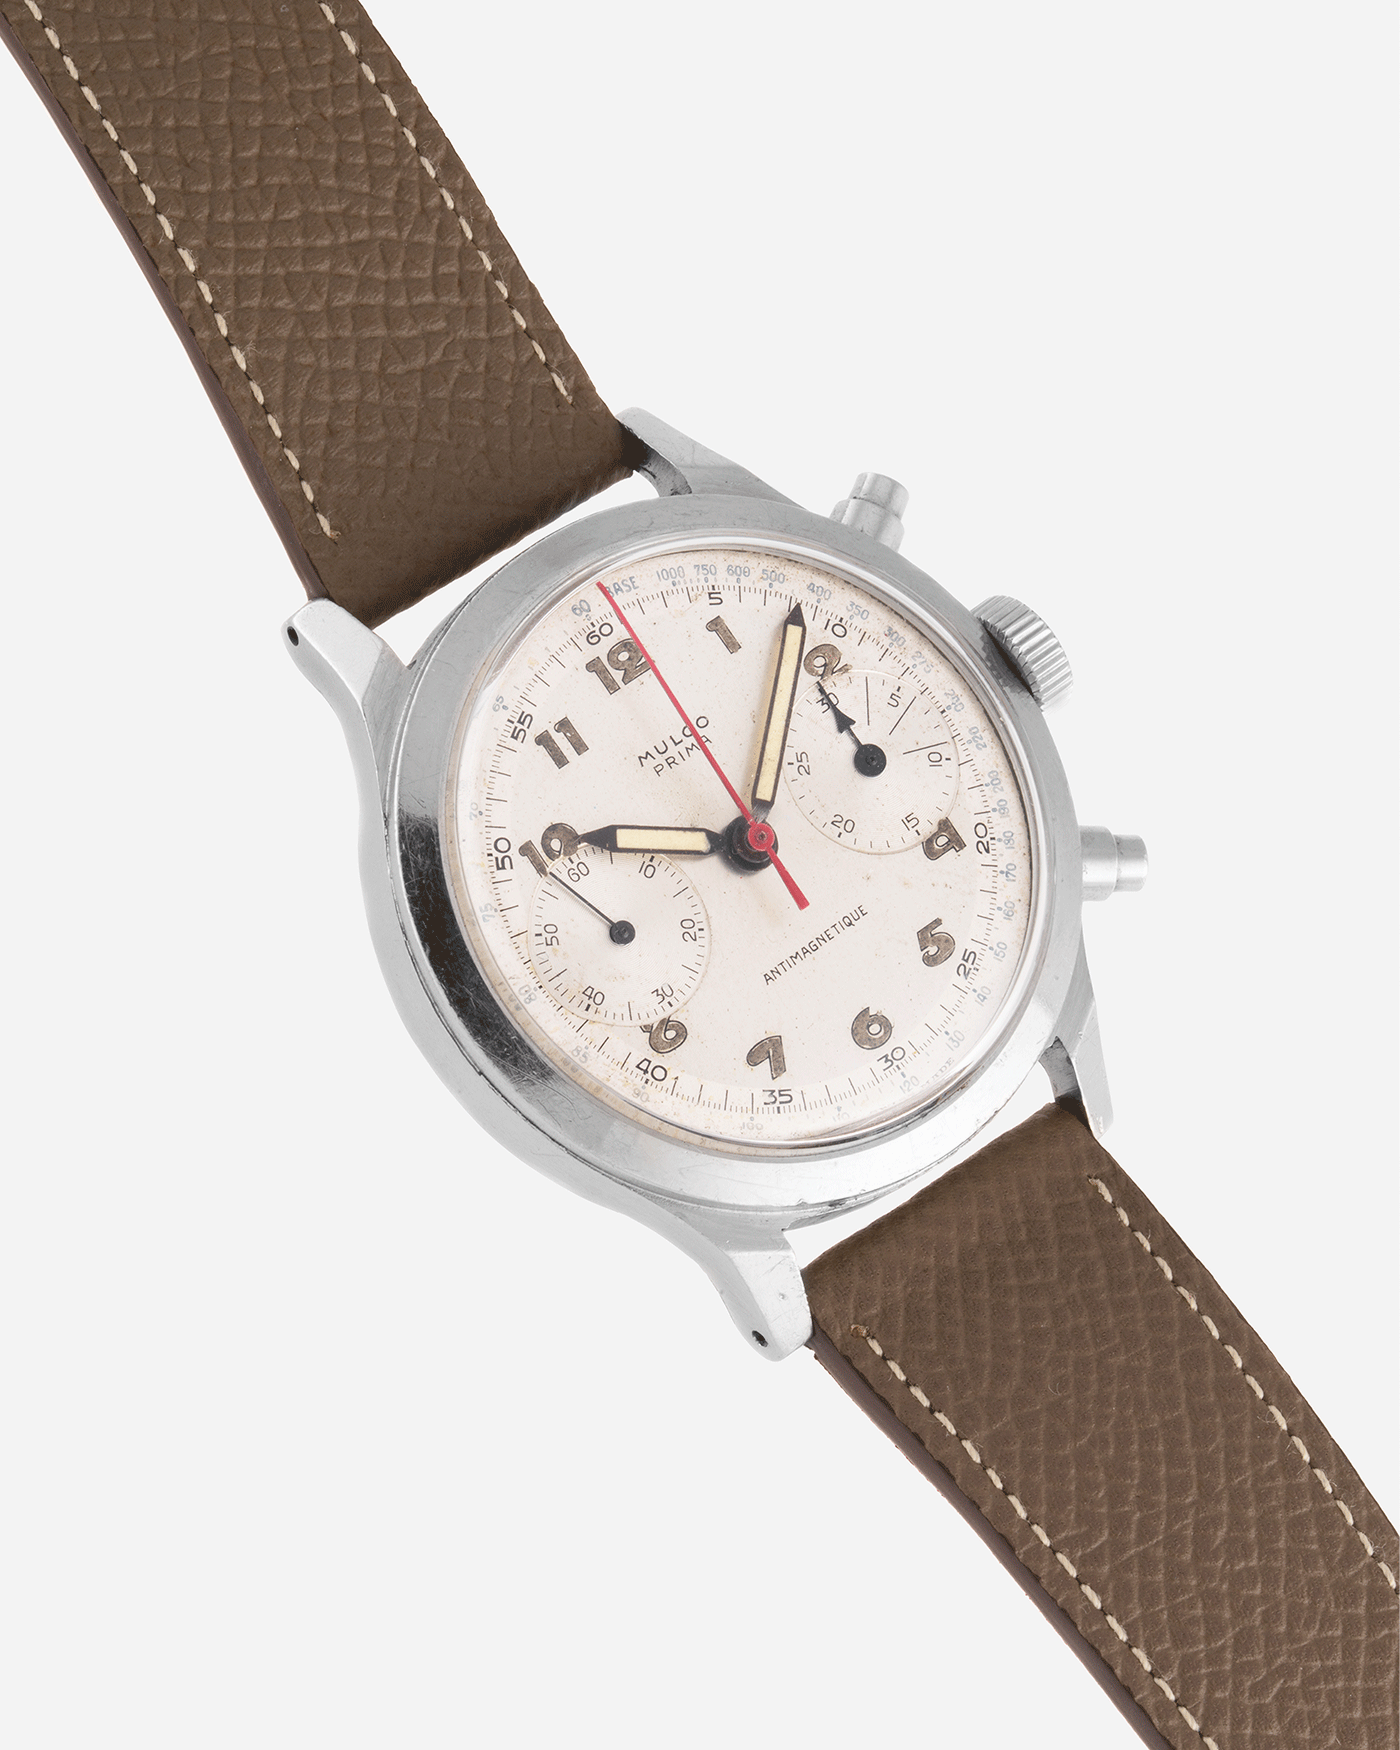 Mulco Prima Spillman Case Chronograph Vintage Watch | S.Song Vintage Watches